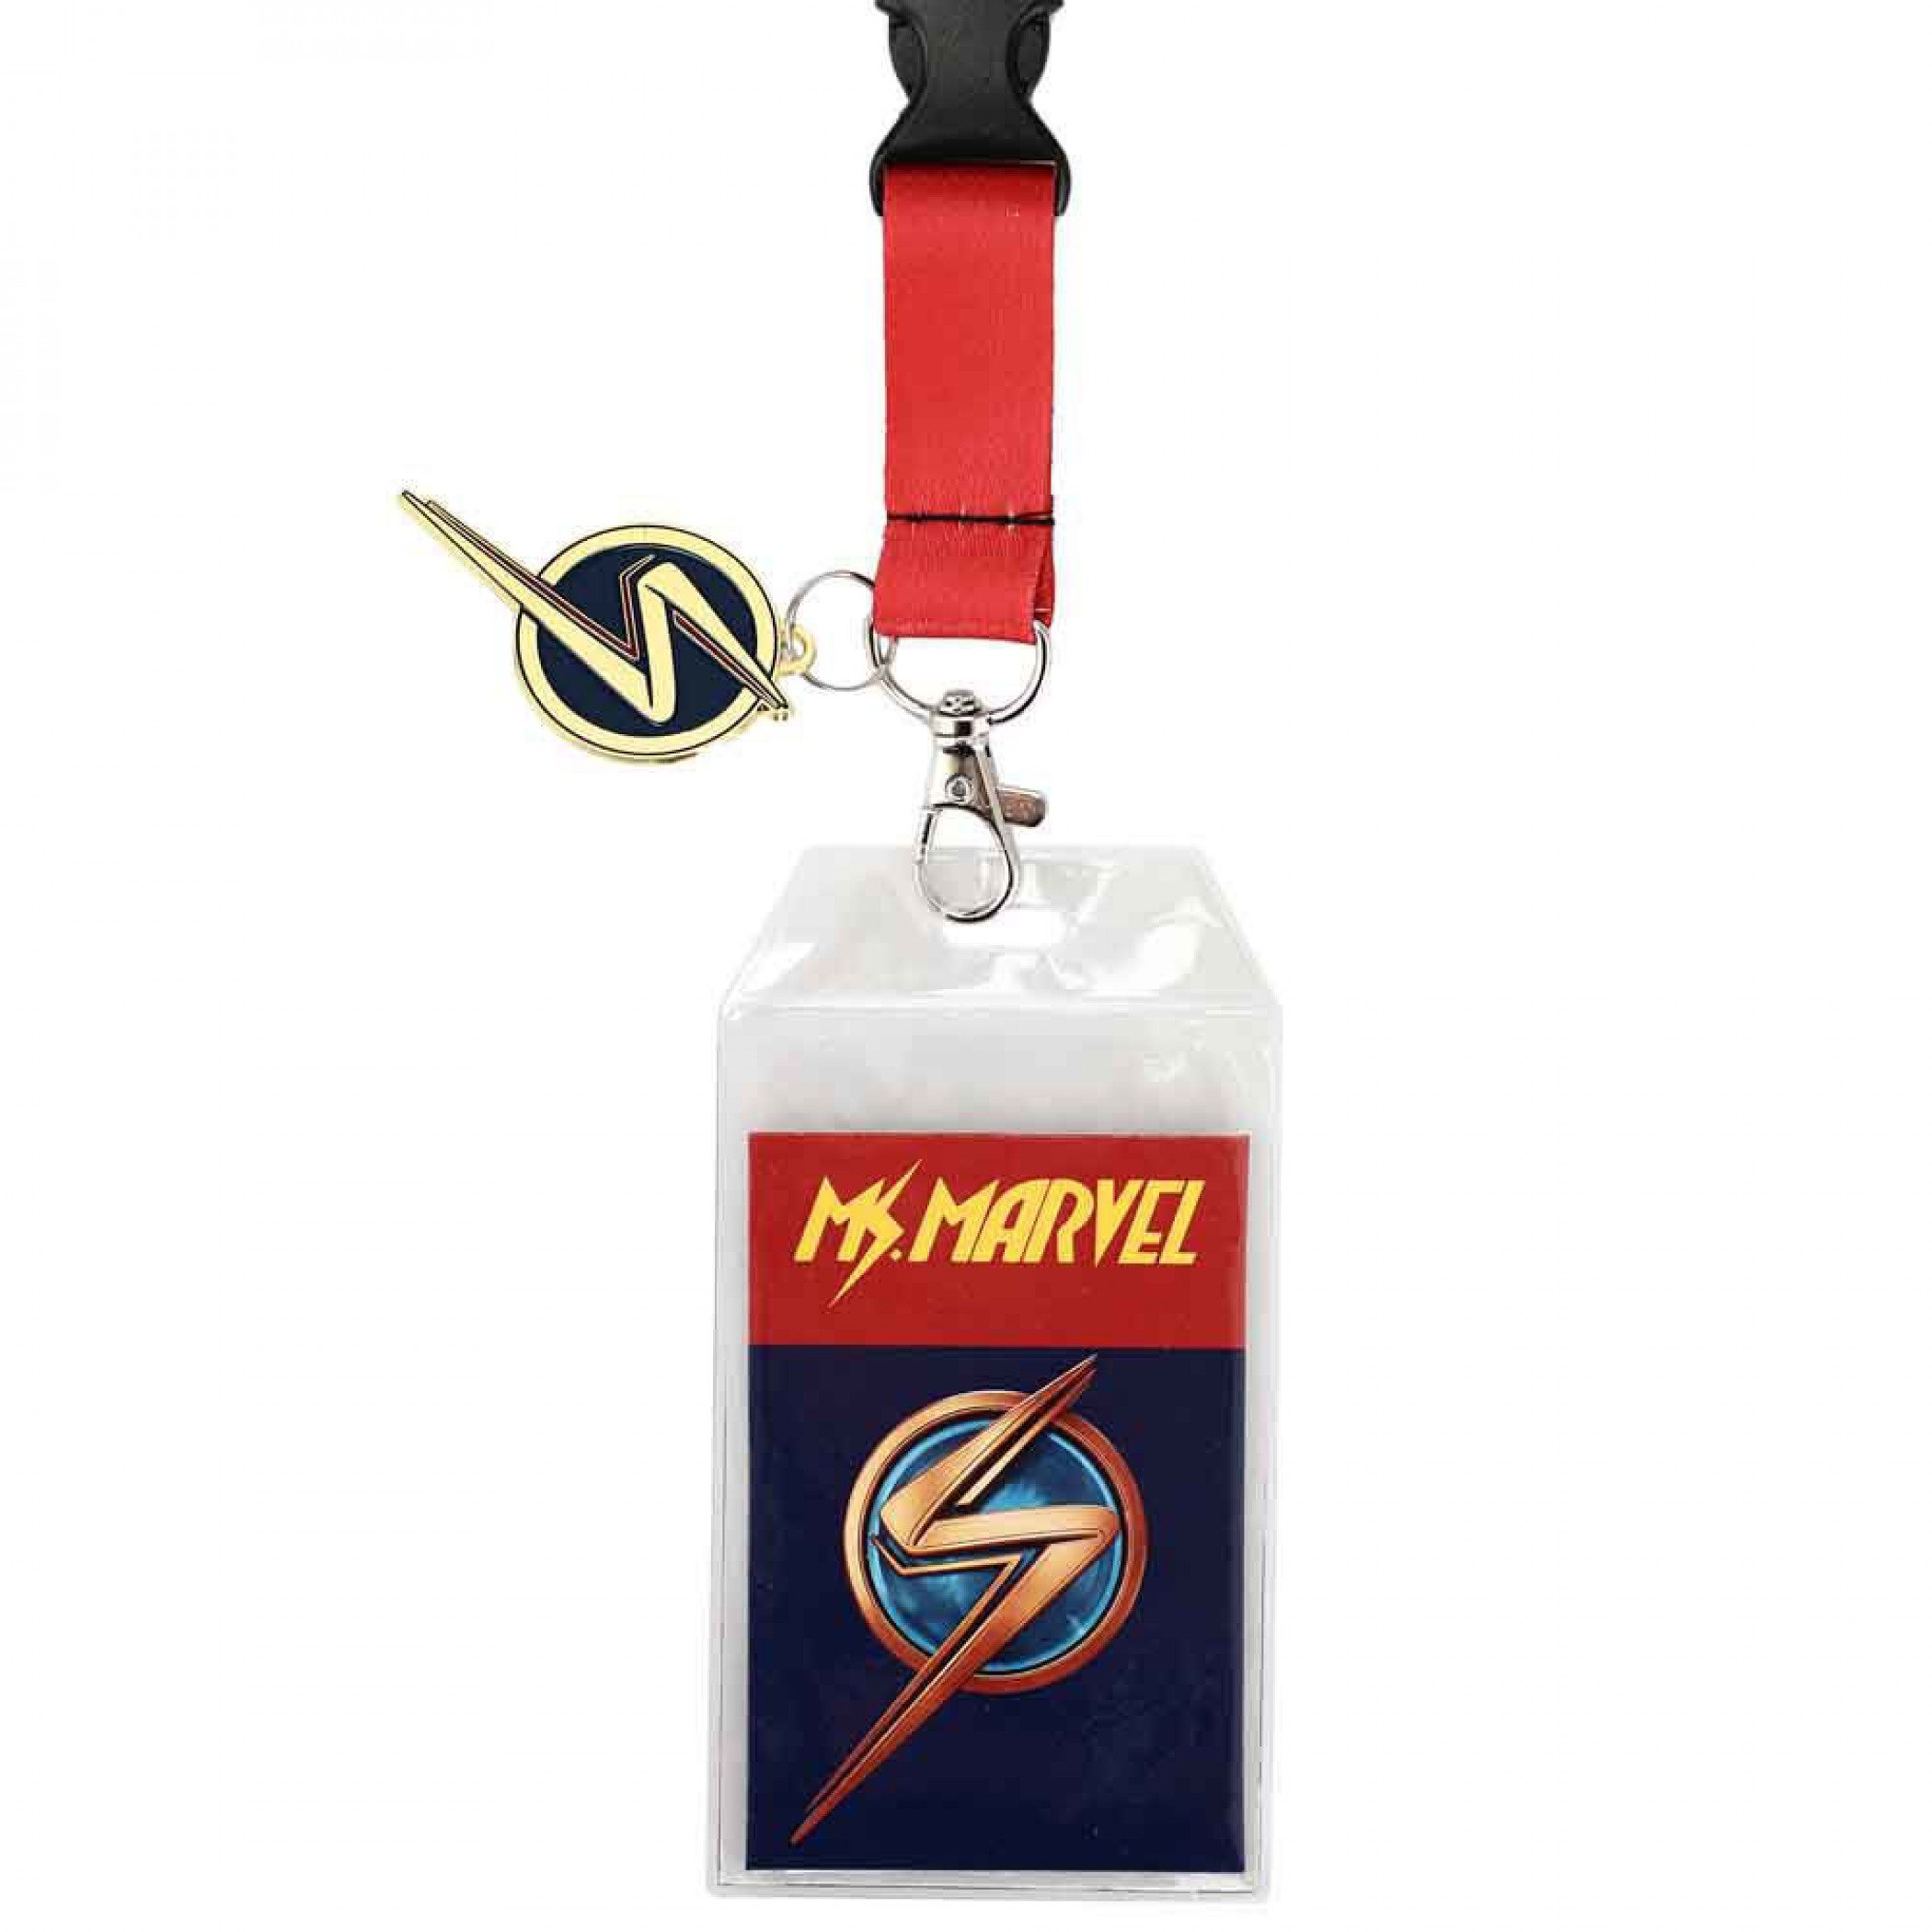 Ms. Marvel Doodles Lanyard with Rubber Charm